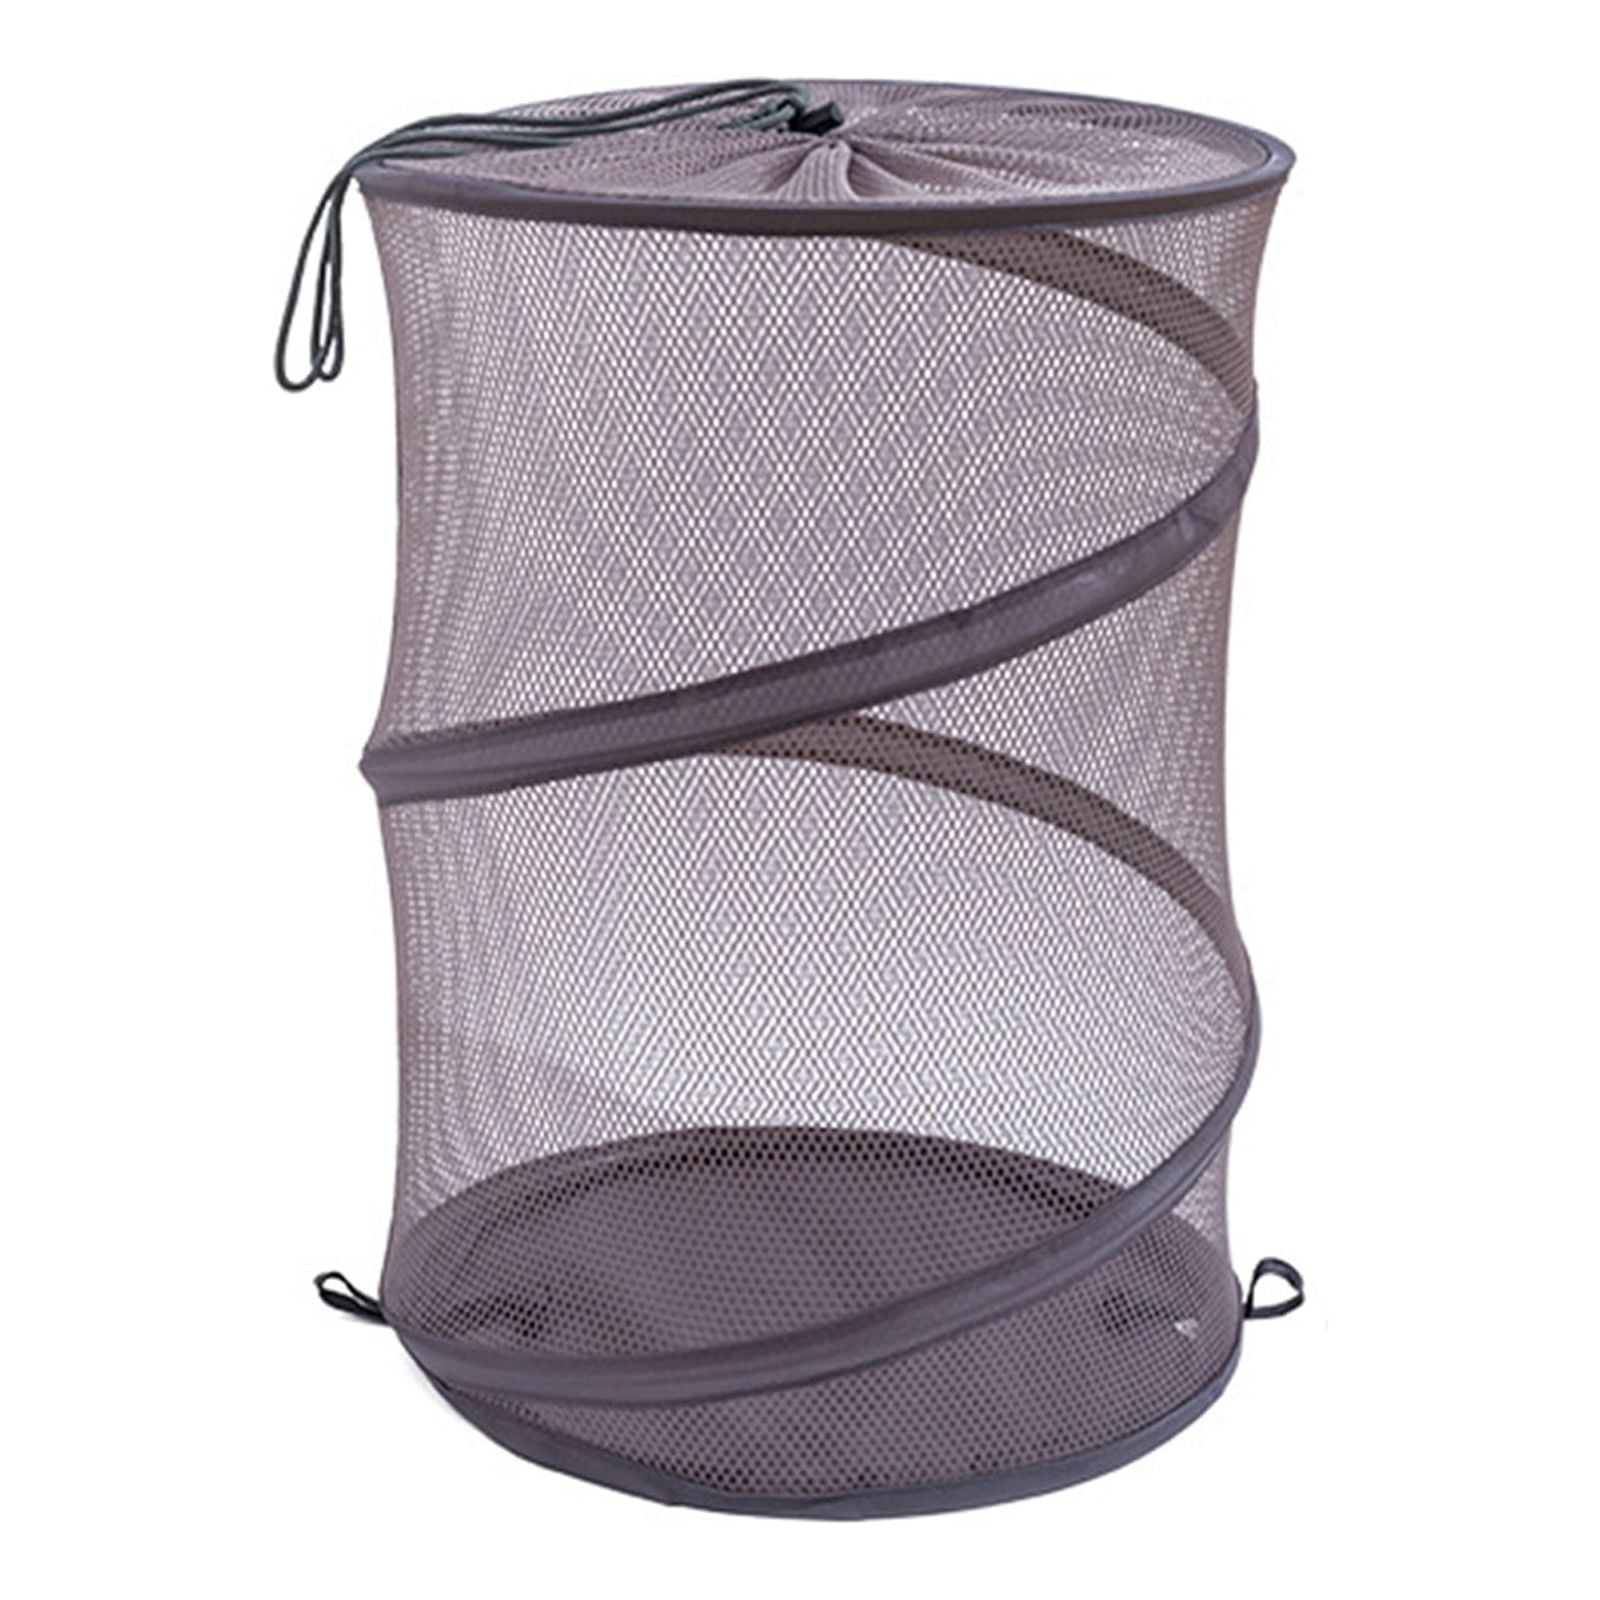 Limei Mesh Pop Up Laundry Hamper Collapsible Laundry Basket with Side  Pocket Foldable Small Dirty Clothes Storage Bin for Bedroom Dormitory Camp